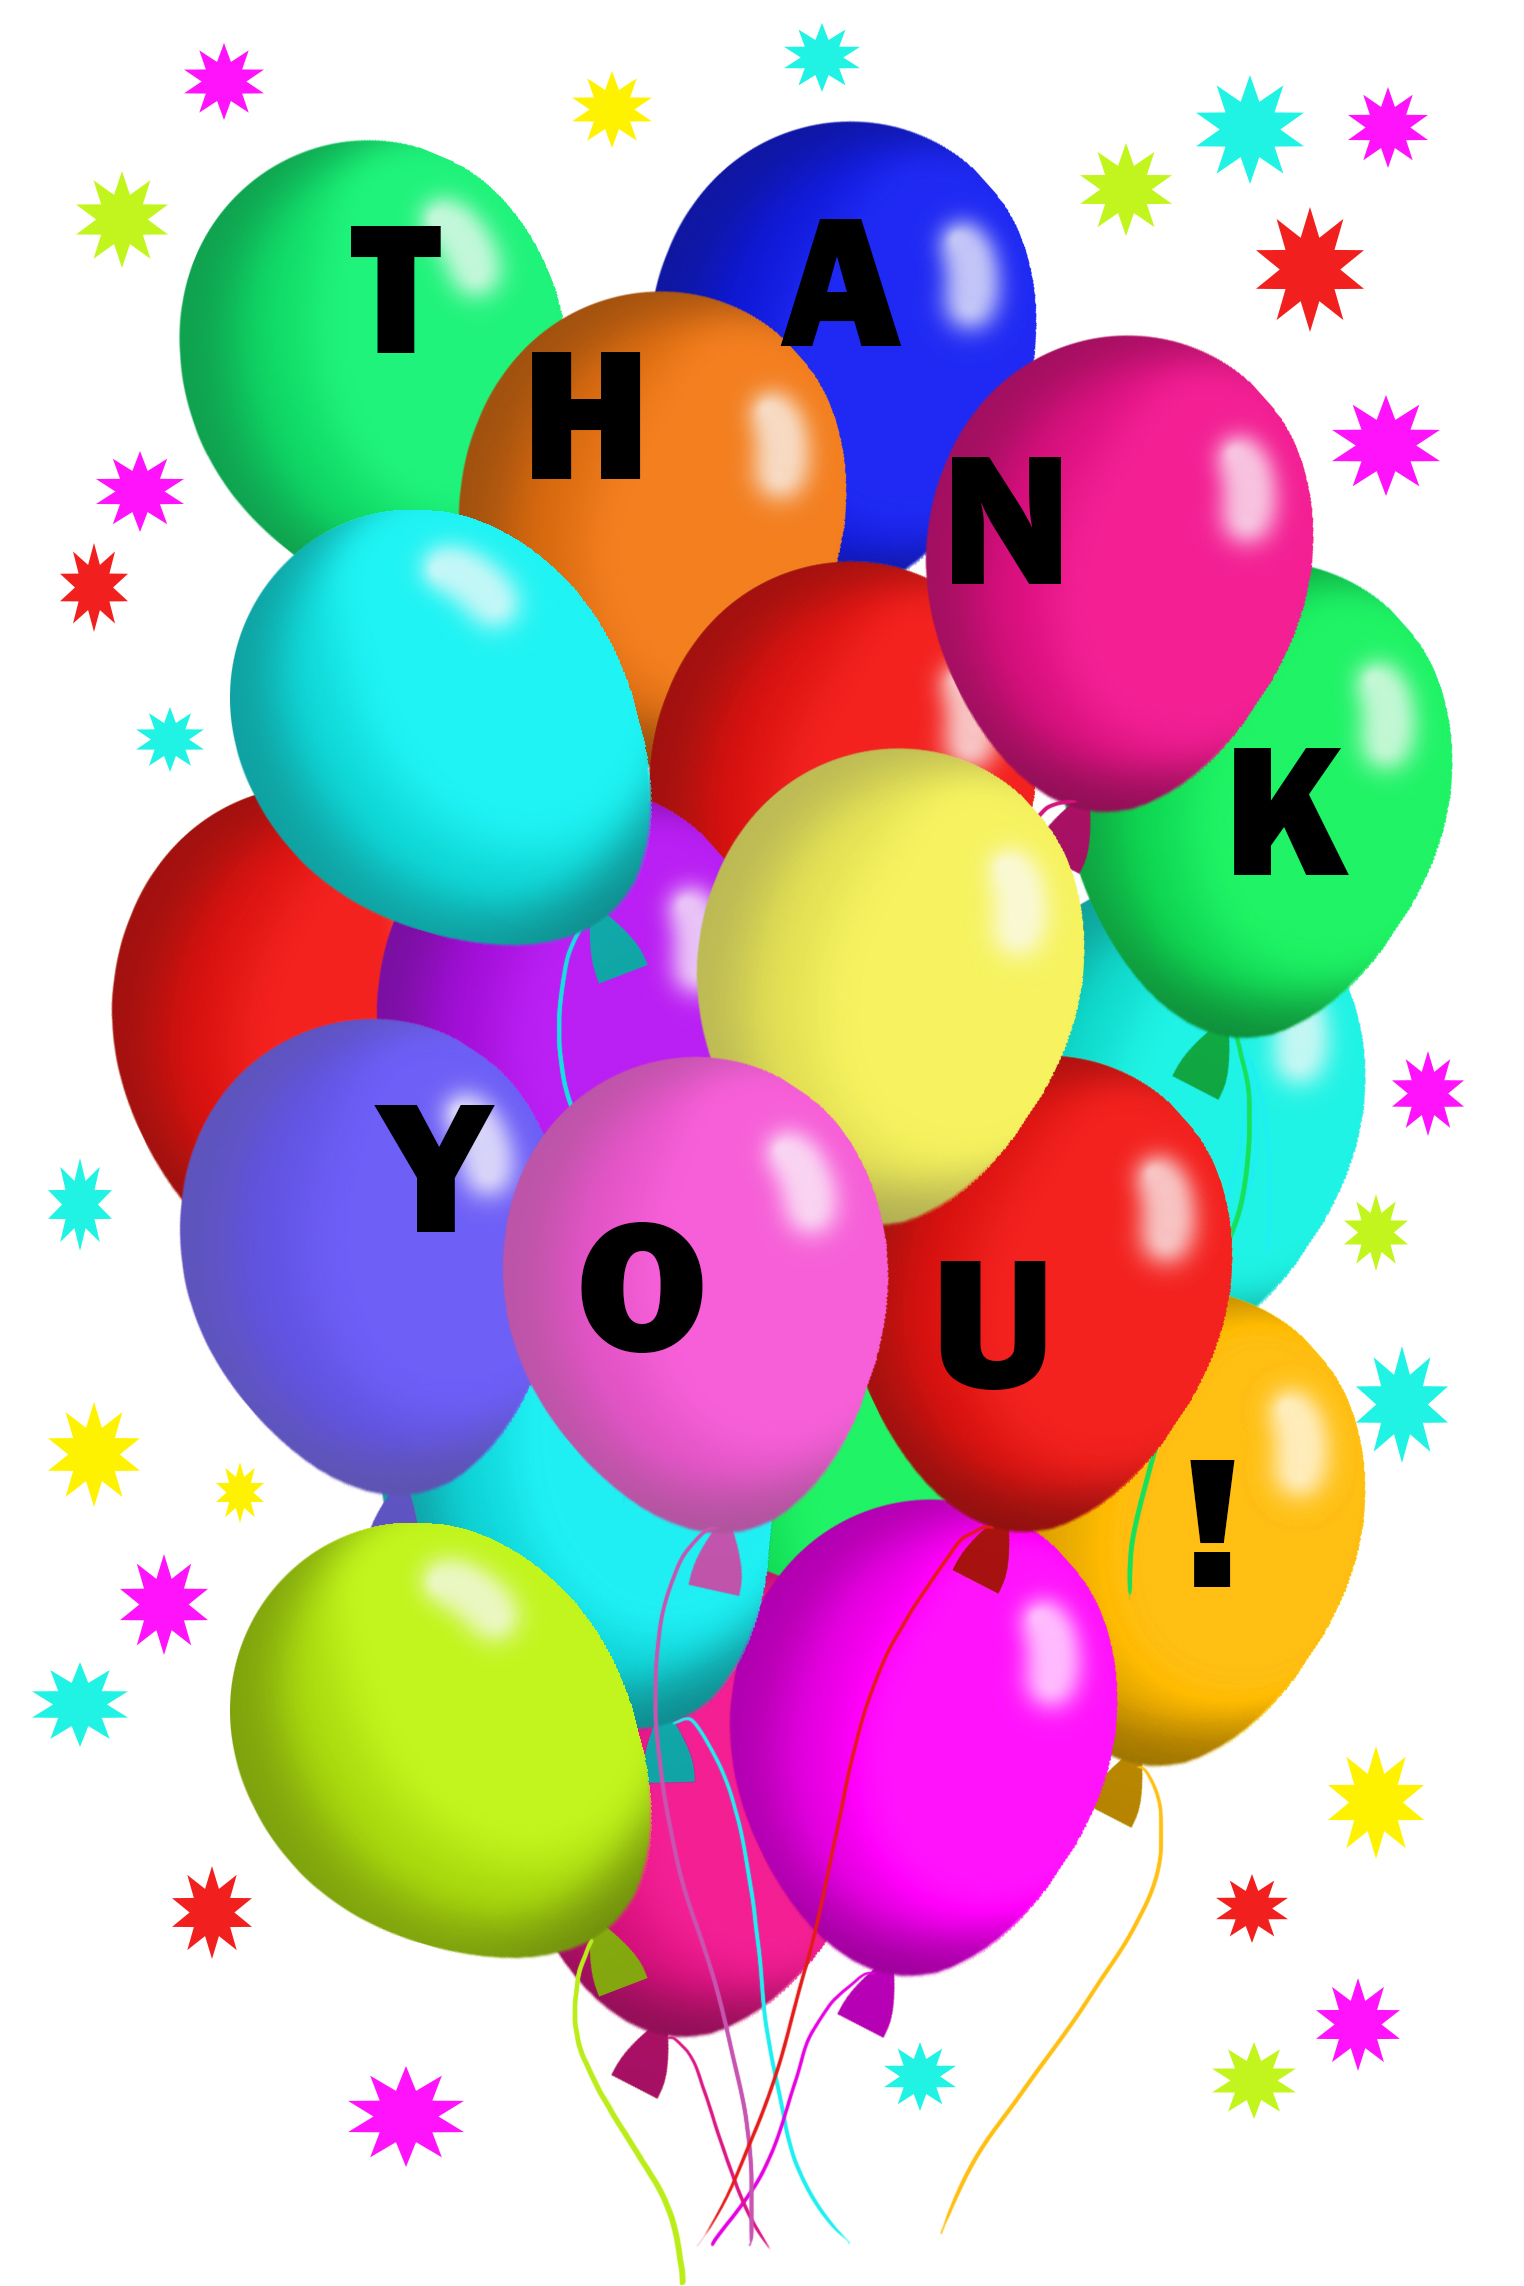 6003 Balloons free clipart.